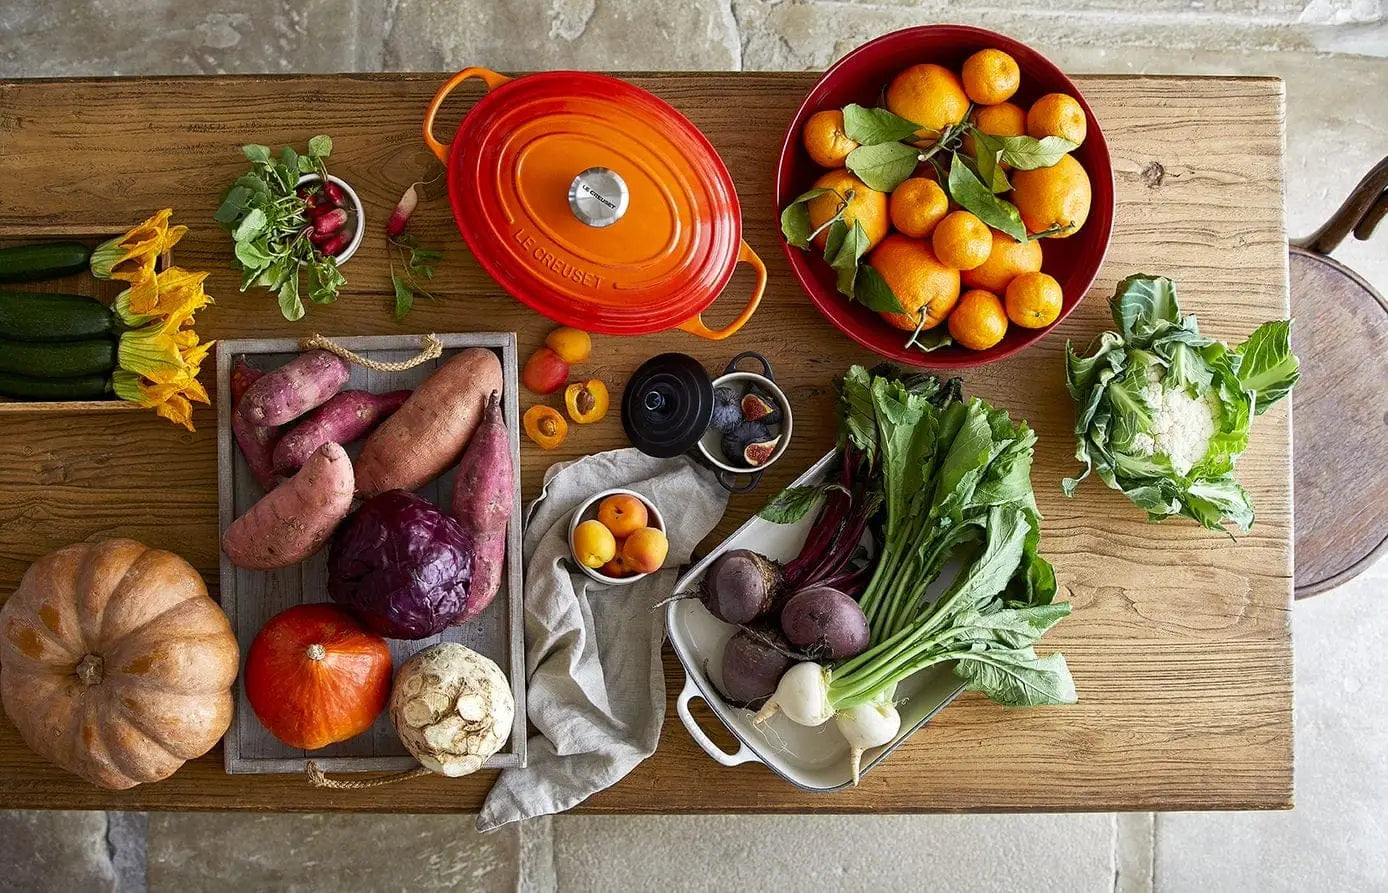 Le Creuset Farm Fresh collection including Oval Casserole in Volcanic and various autumnal vegetables